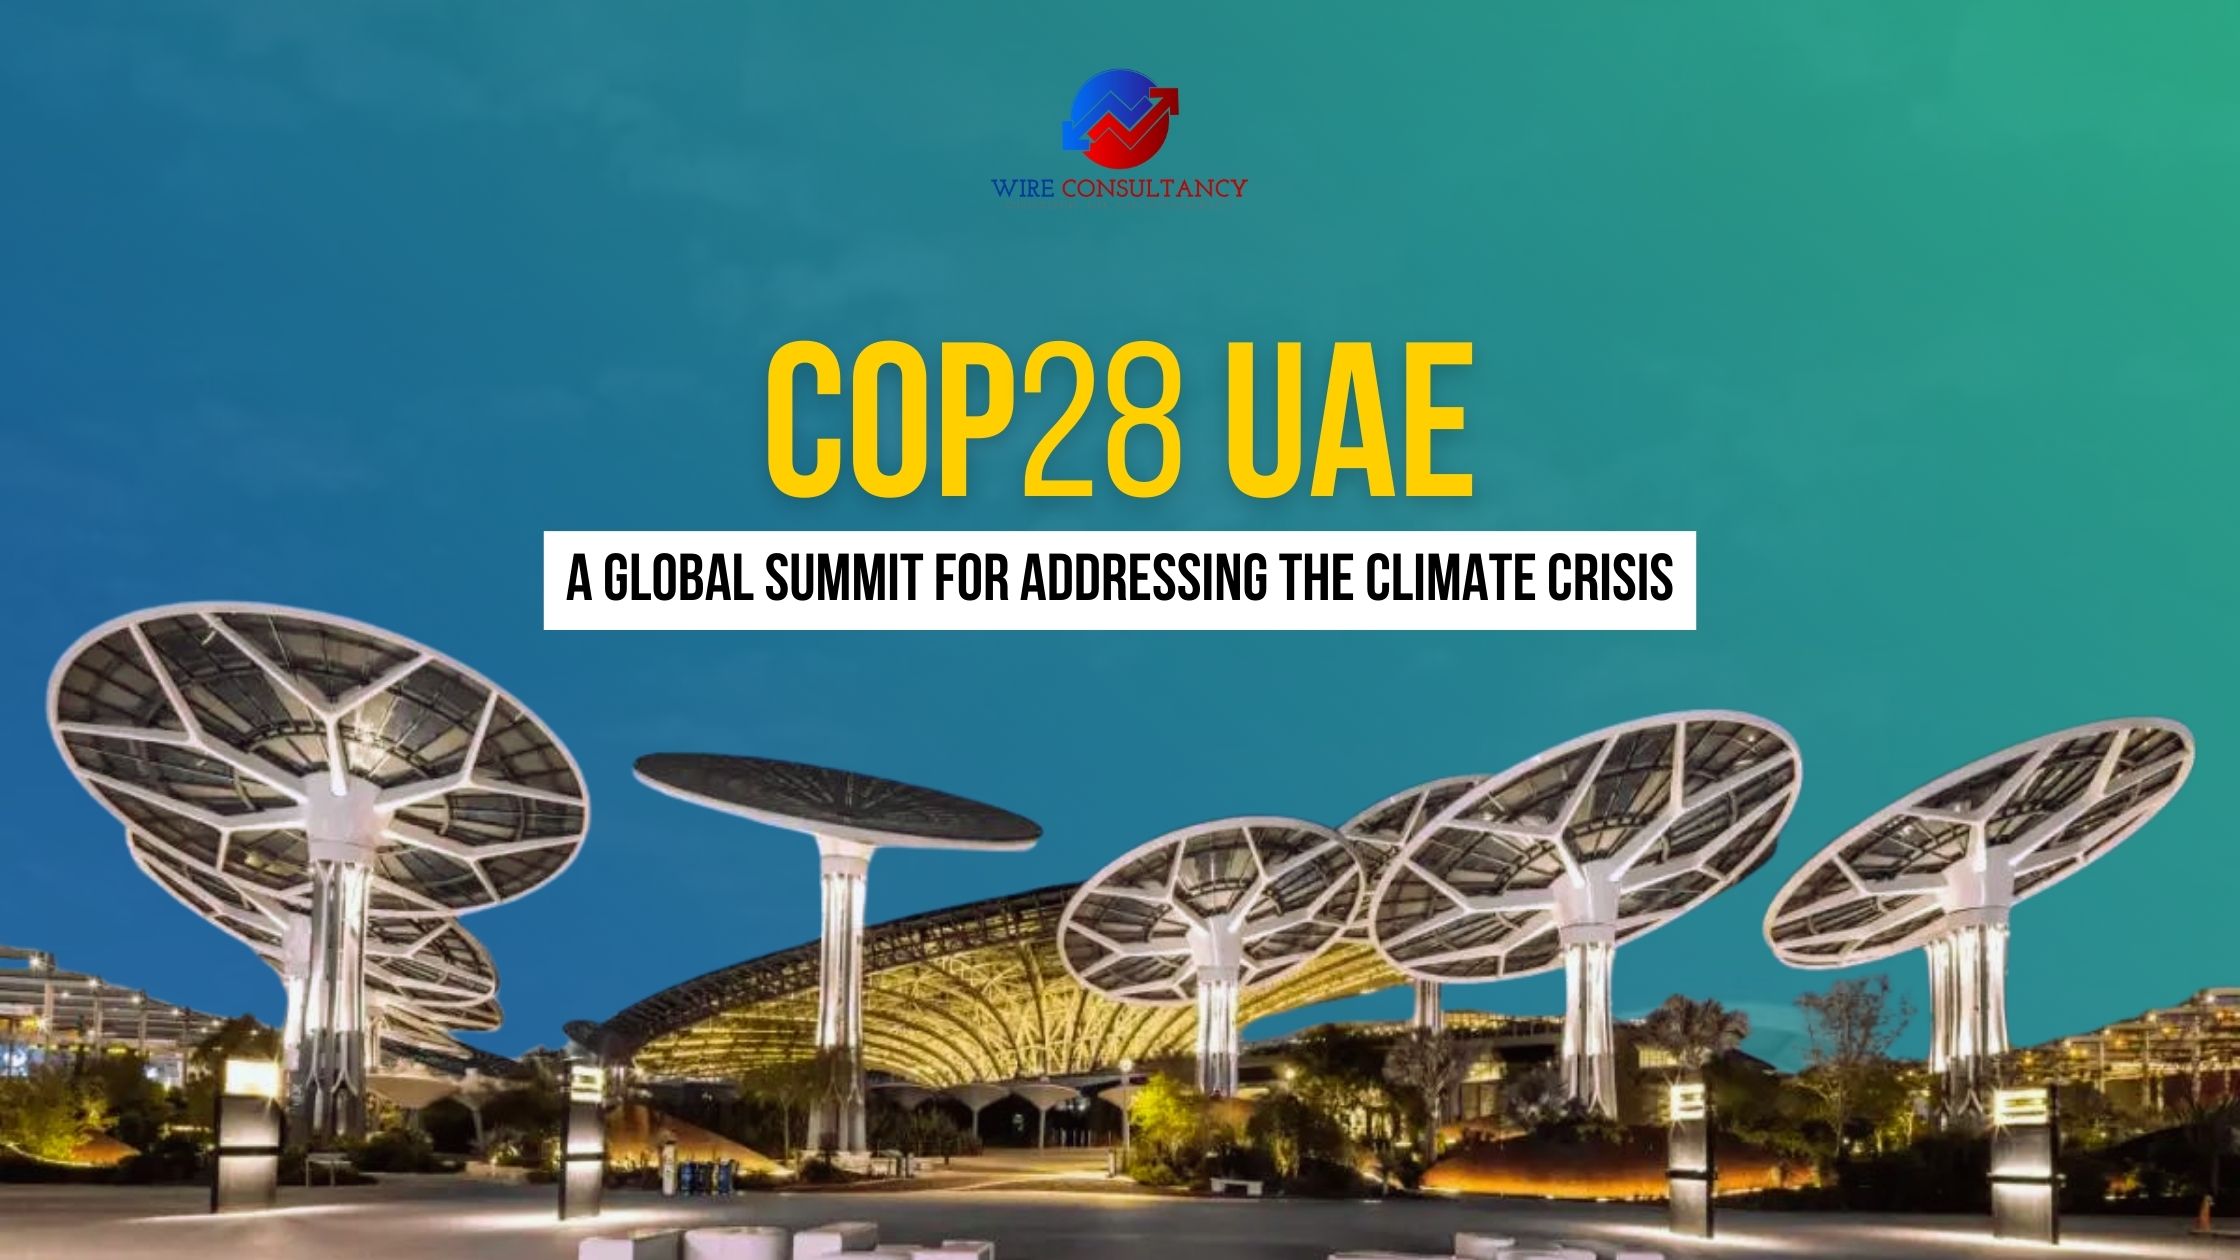 COP28: A Global Summit for Addressing the Climate Crisis